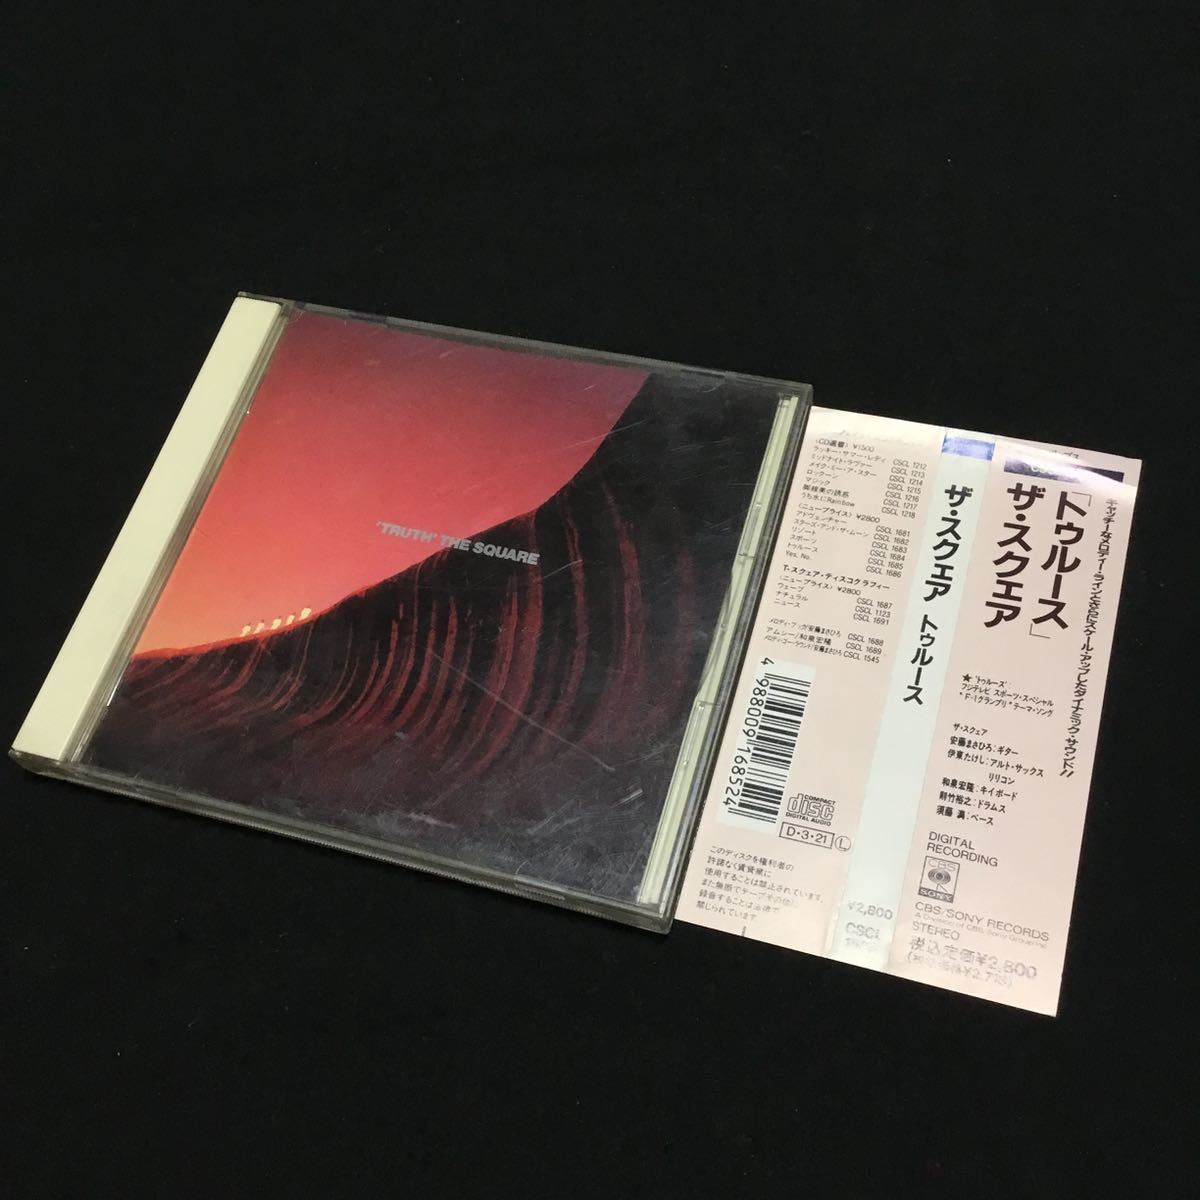 CD THE SQUARE / TRUTH ザ・スクエア トゥルース 帯付 4988009168524 CSCL-1685_画像1